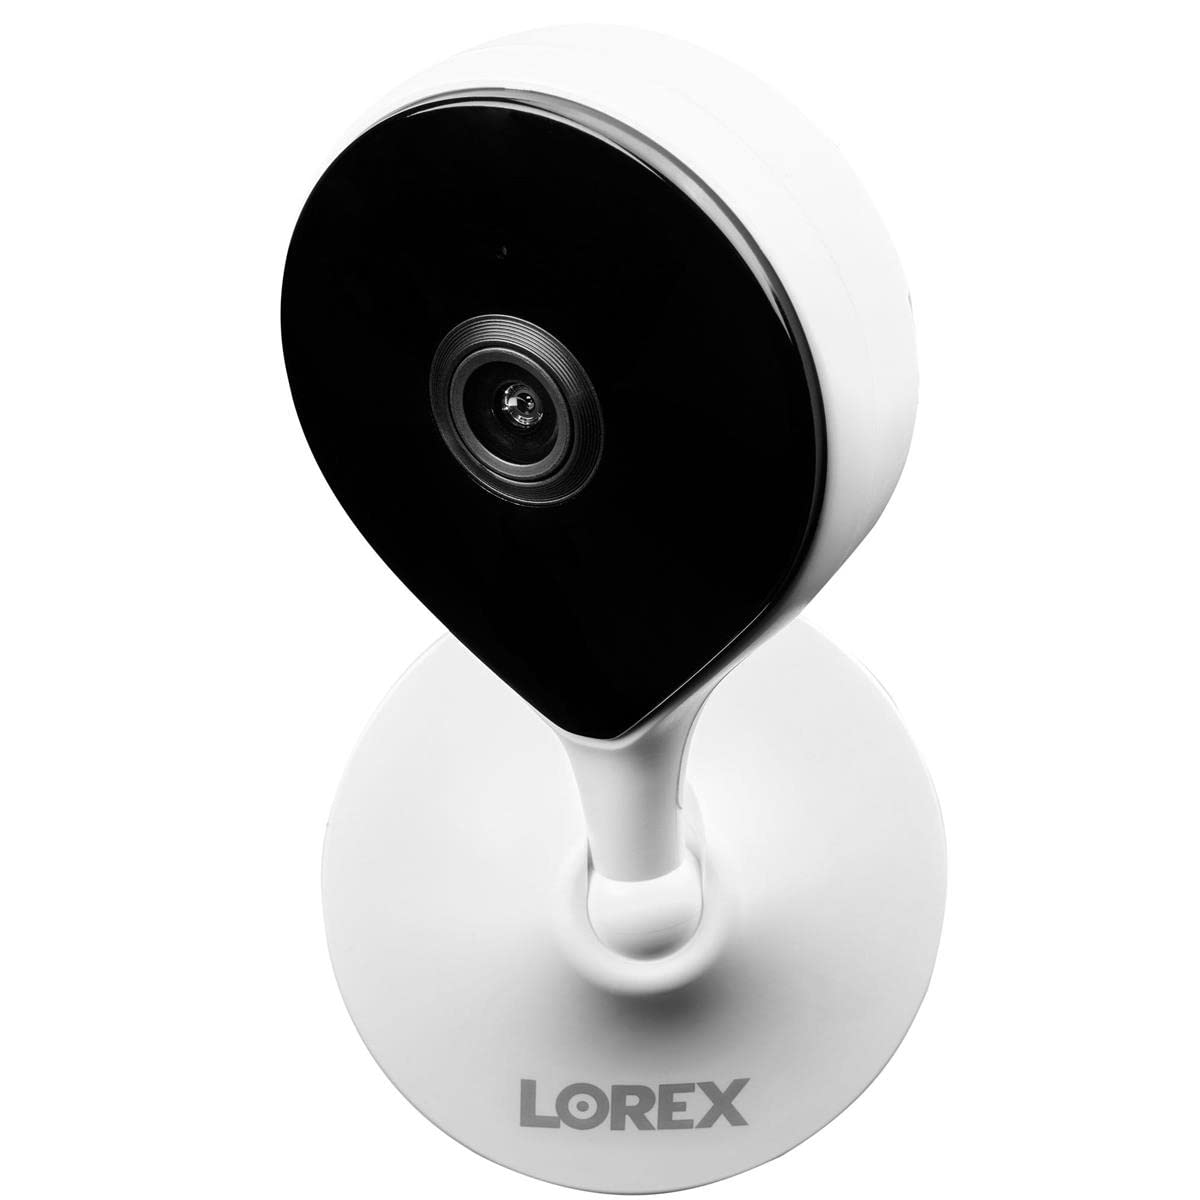 Lorex 2K Indoor WiFi Security Camera, Add-On Security Camera for Wired Surveillance System (1080p)